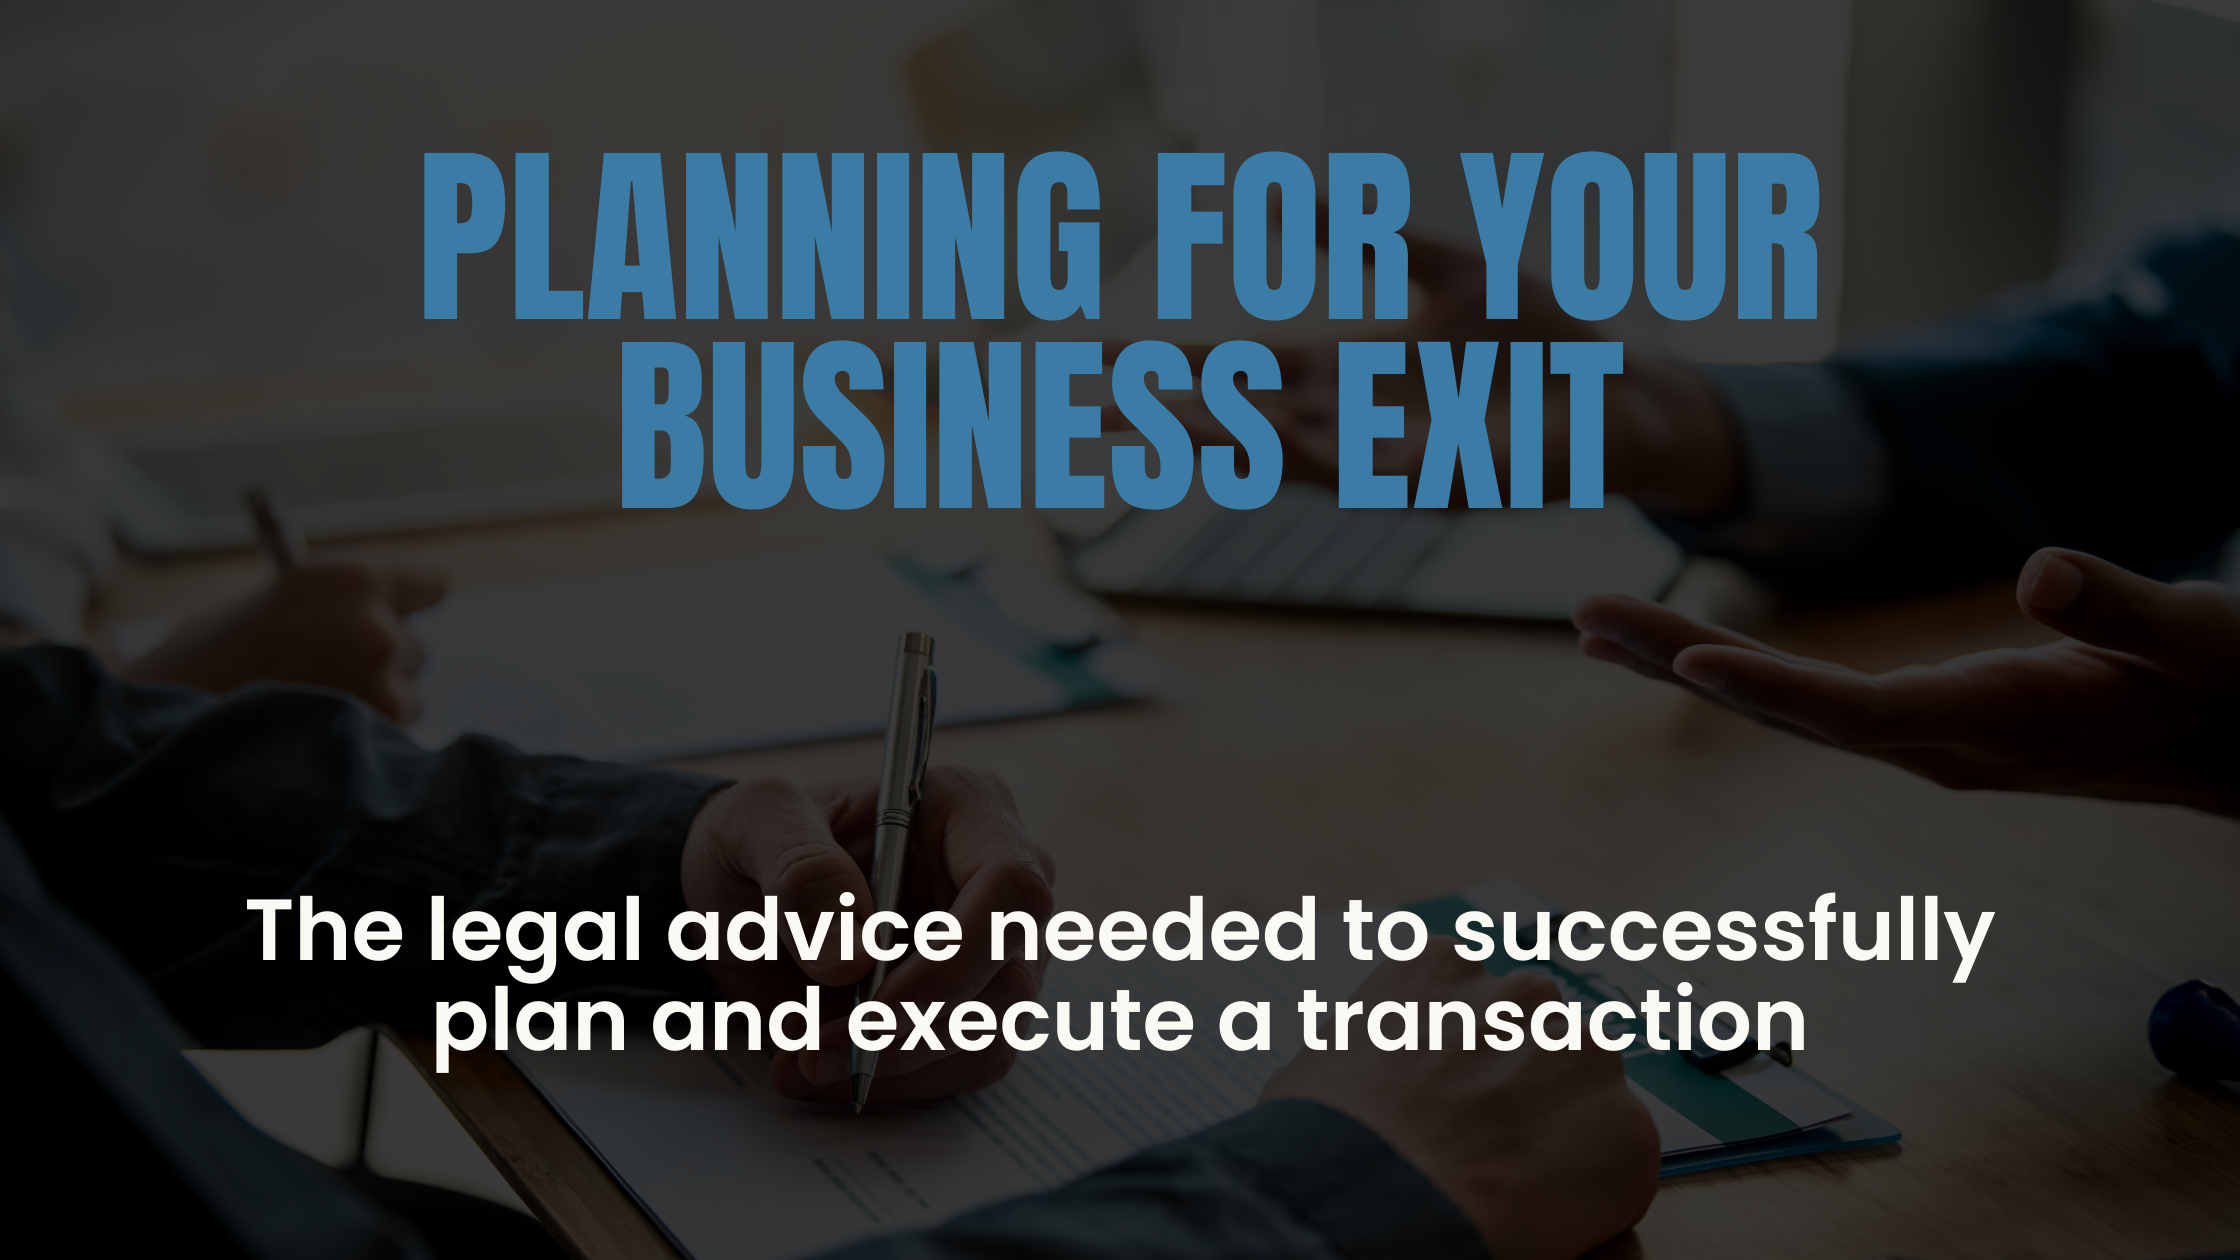 Exit Strategy Planning and Legal Due Diligence - Article written by a leading Exit Planner and Corporate Lawyer